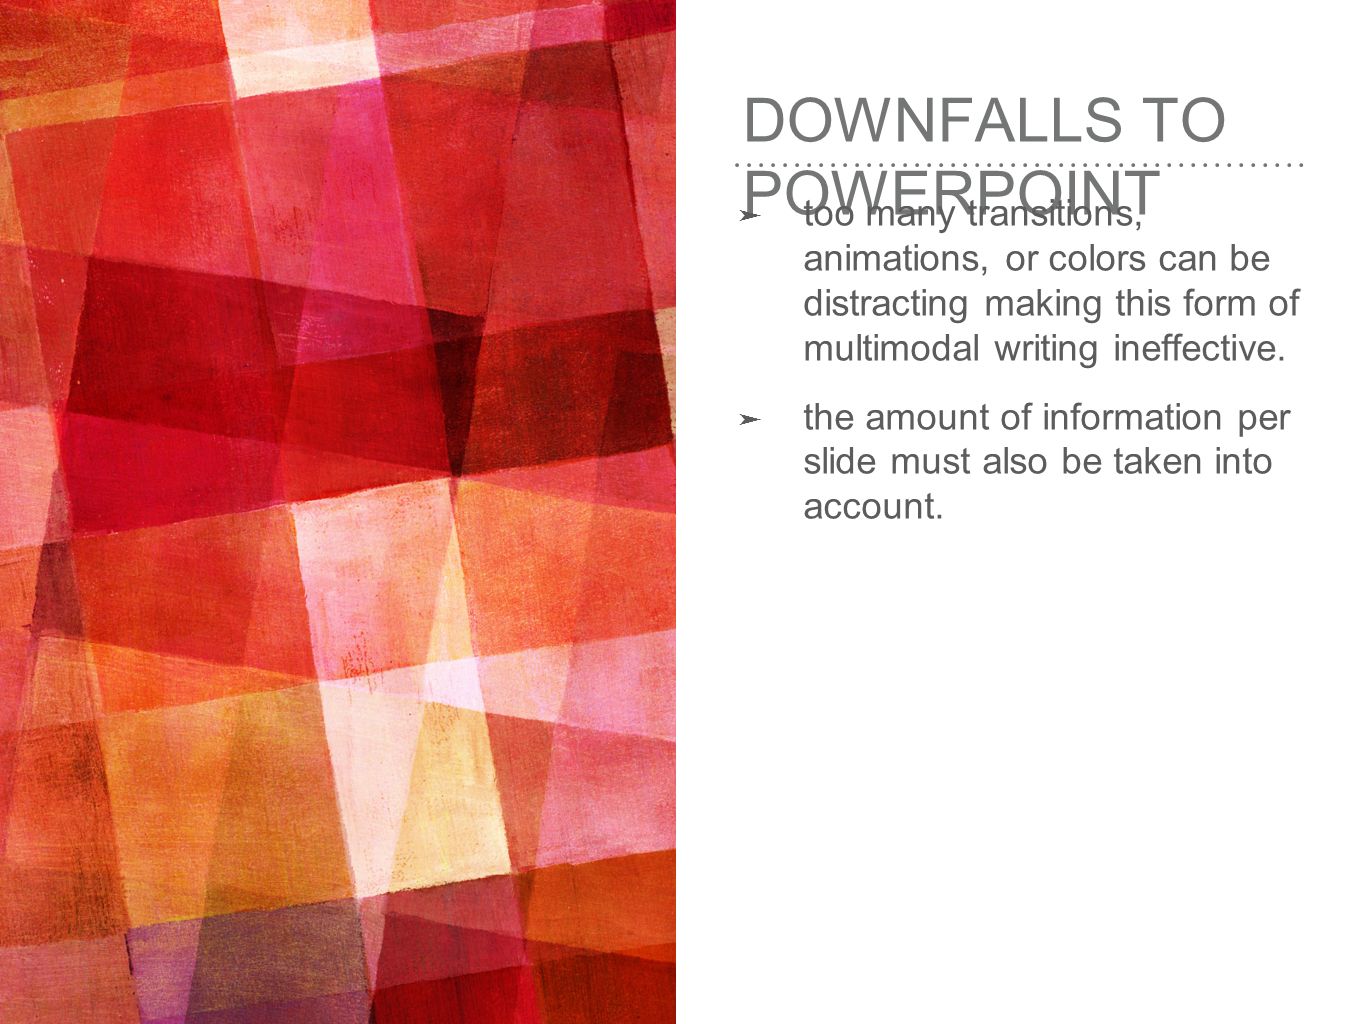 DOWNFALLS TO POWERPOINT ➤ too many transitions, animations, or colors can be distracting making this form of multimodal writing ineffective.